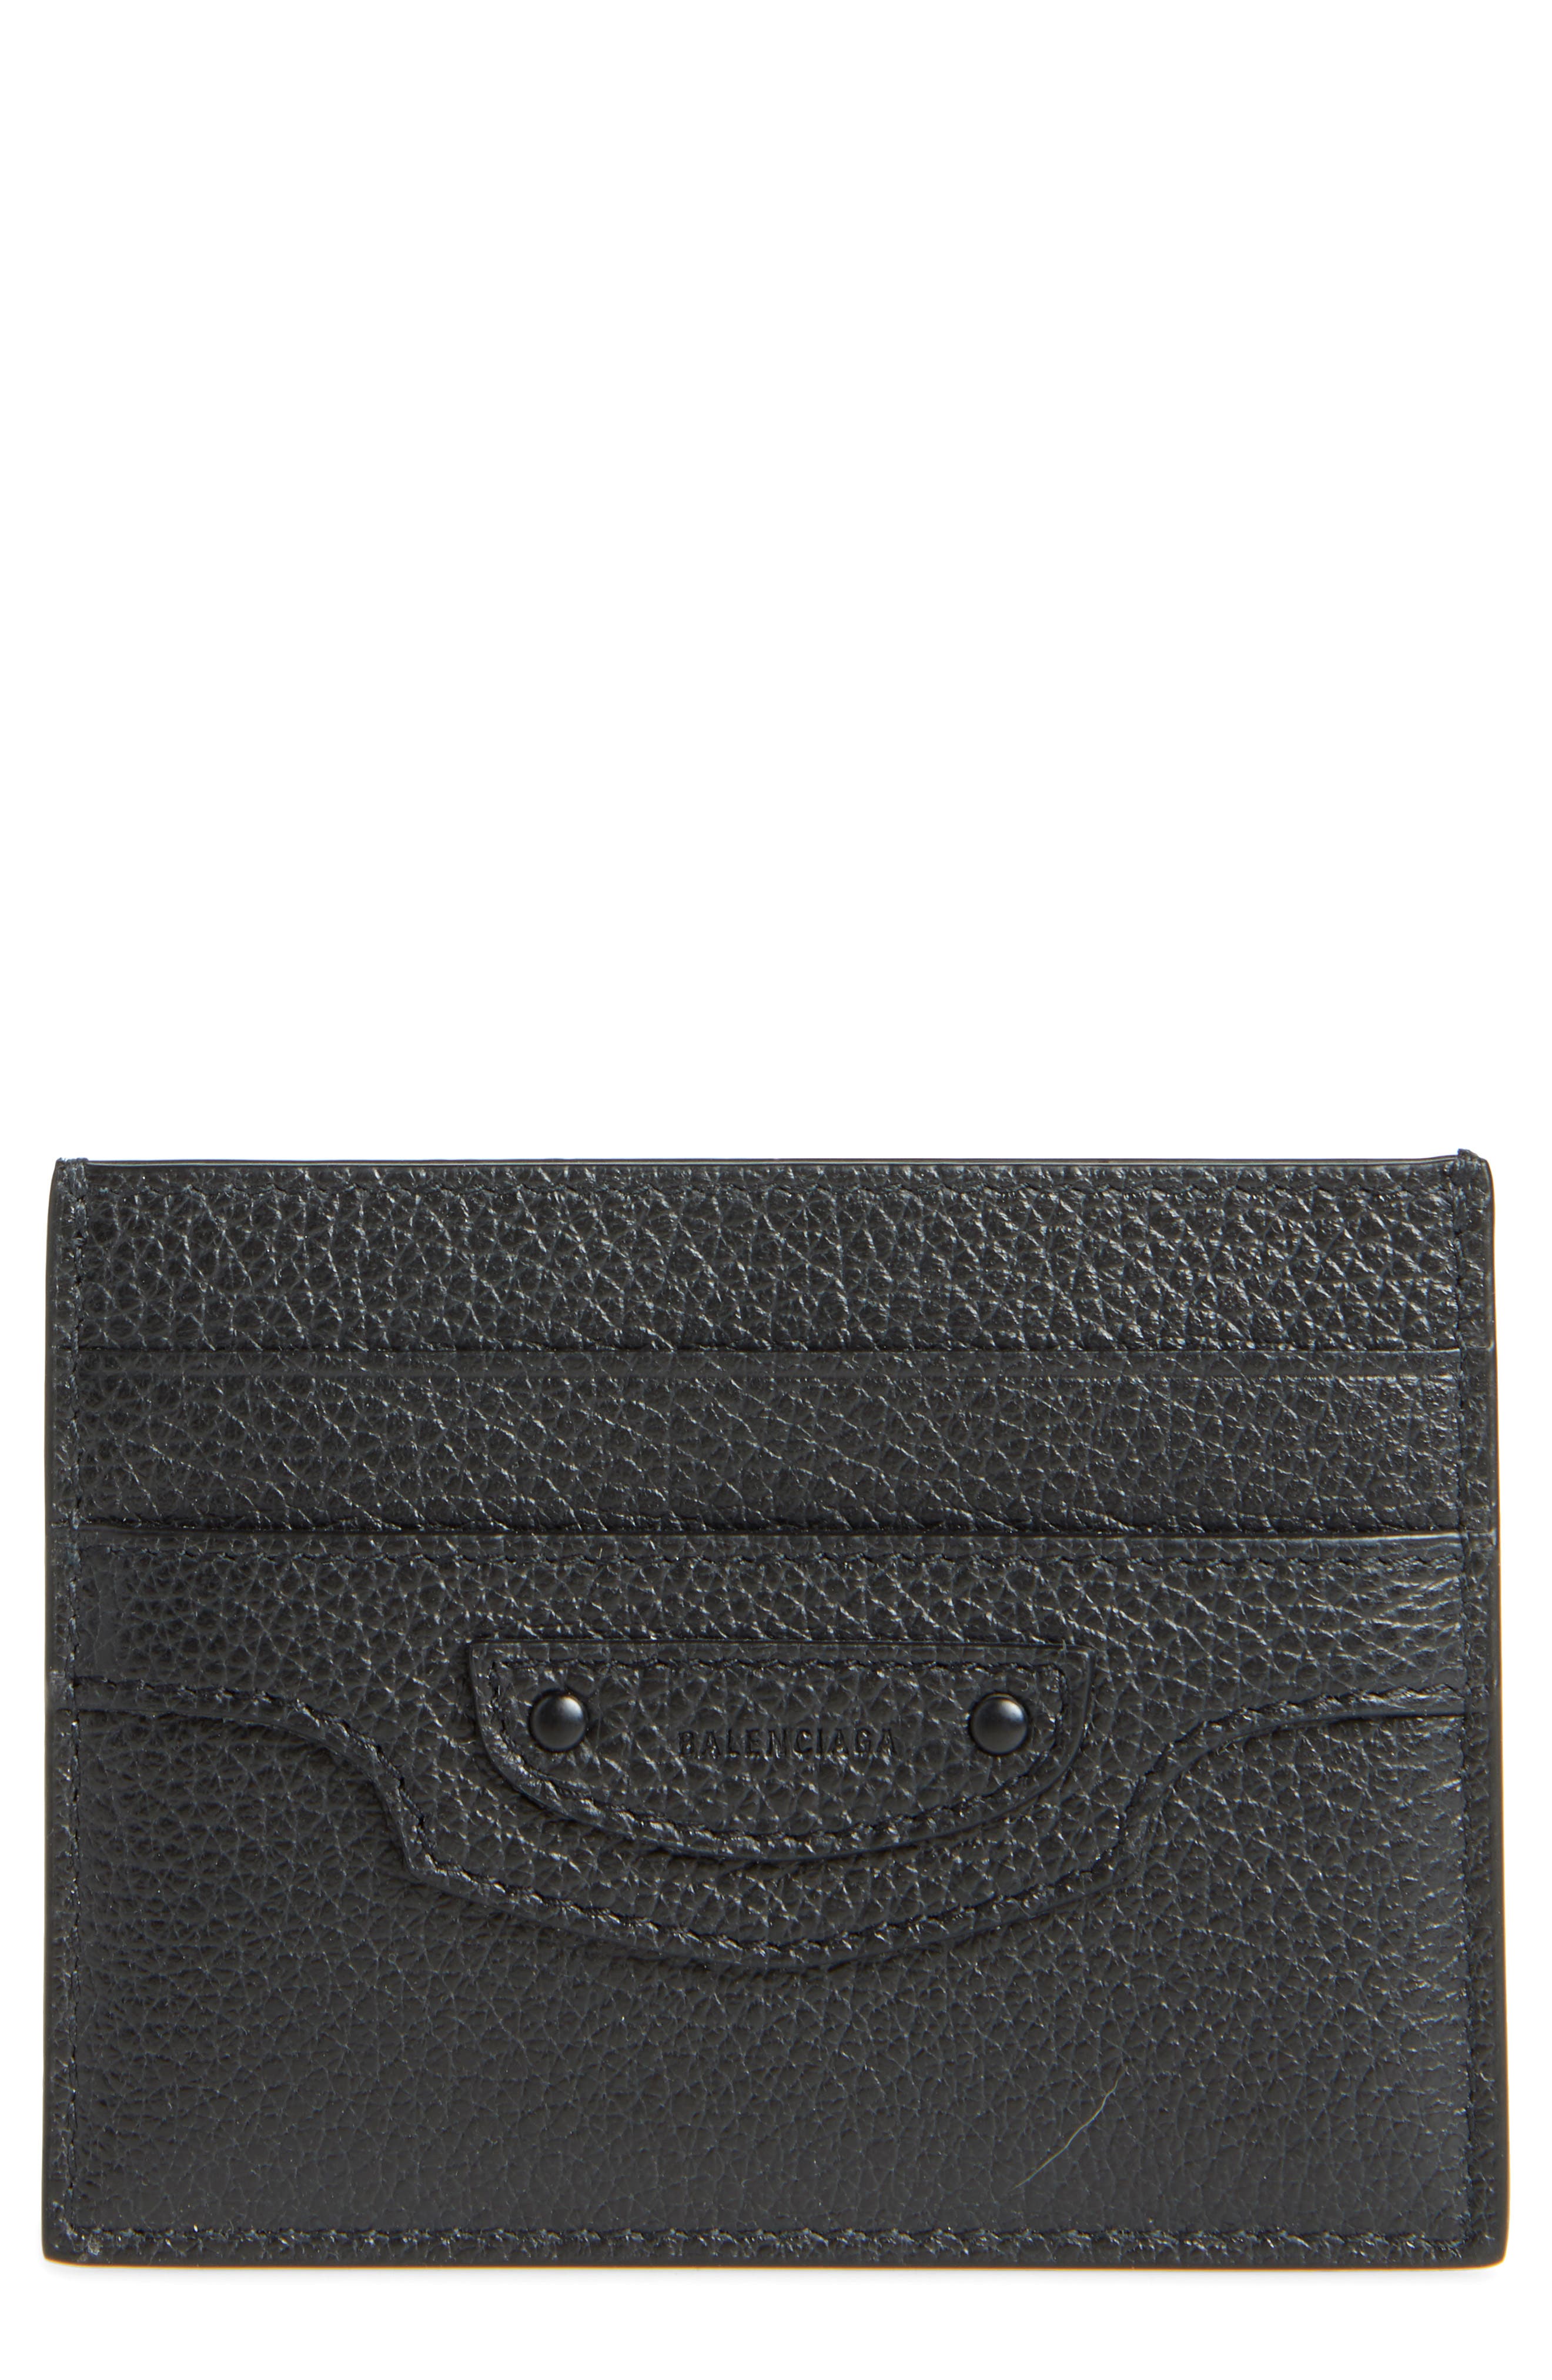 Balenciaga Neo Classic Leather Card Holder in Black at Nordstrom